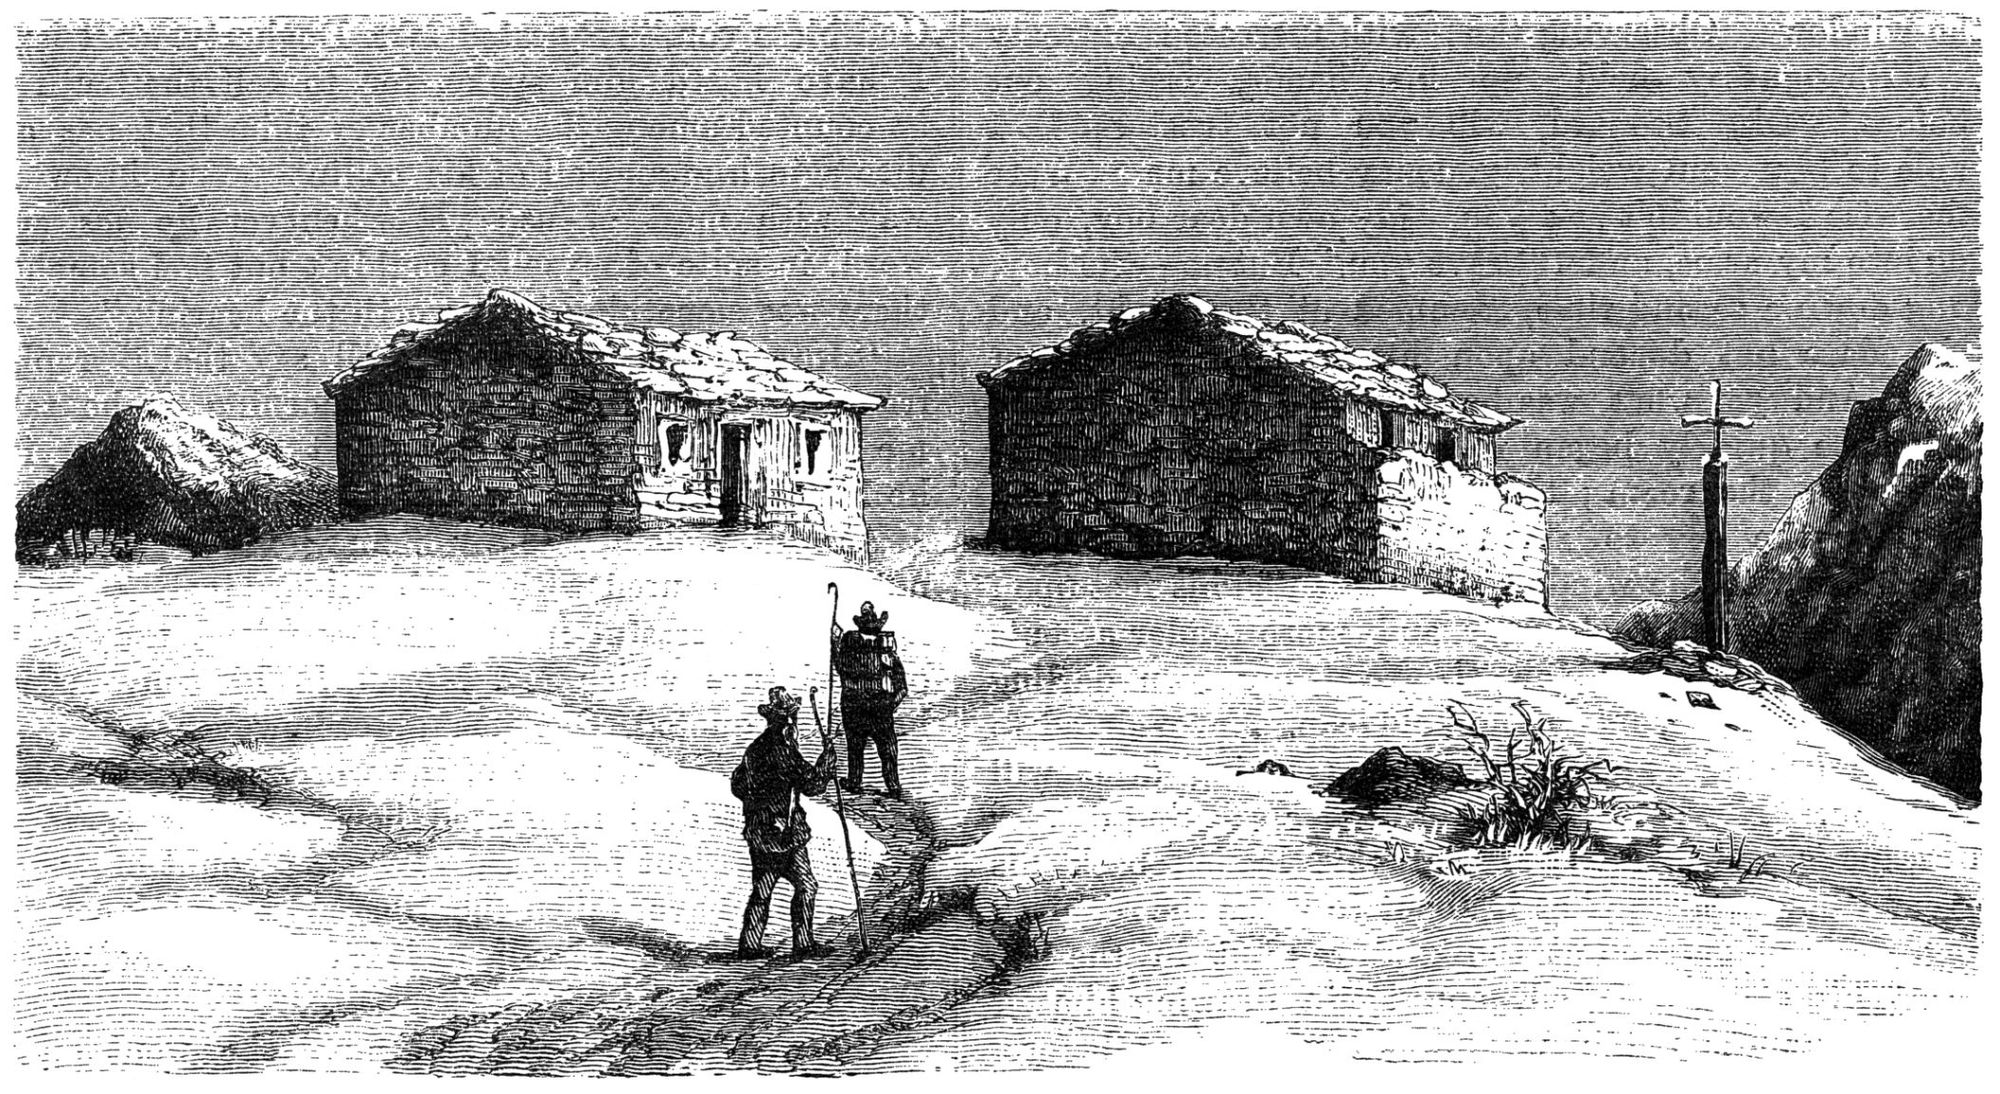 An illustration from "The Family Friend" published by S.W. Partridge & Co. (London, 1875) of the summit of Monte Rosa, the highest mountain in Switzerland. The route on the east face was opened only in 1873. Illustration: Getty